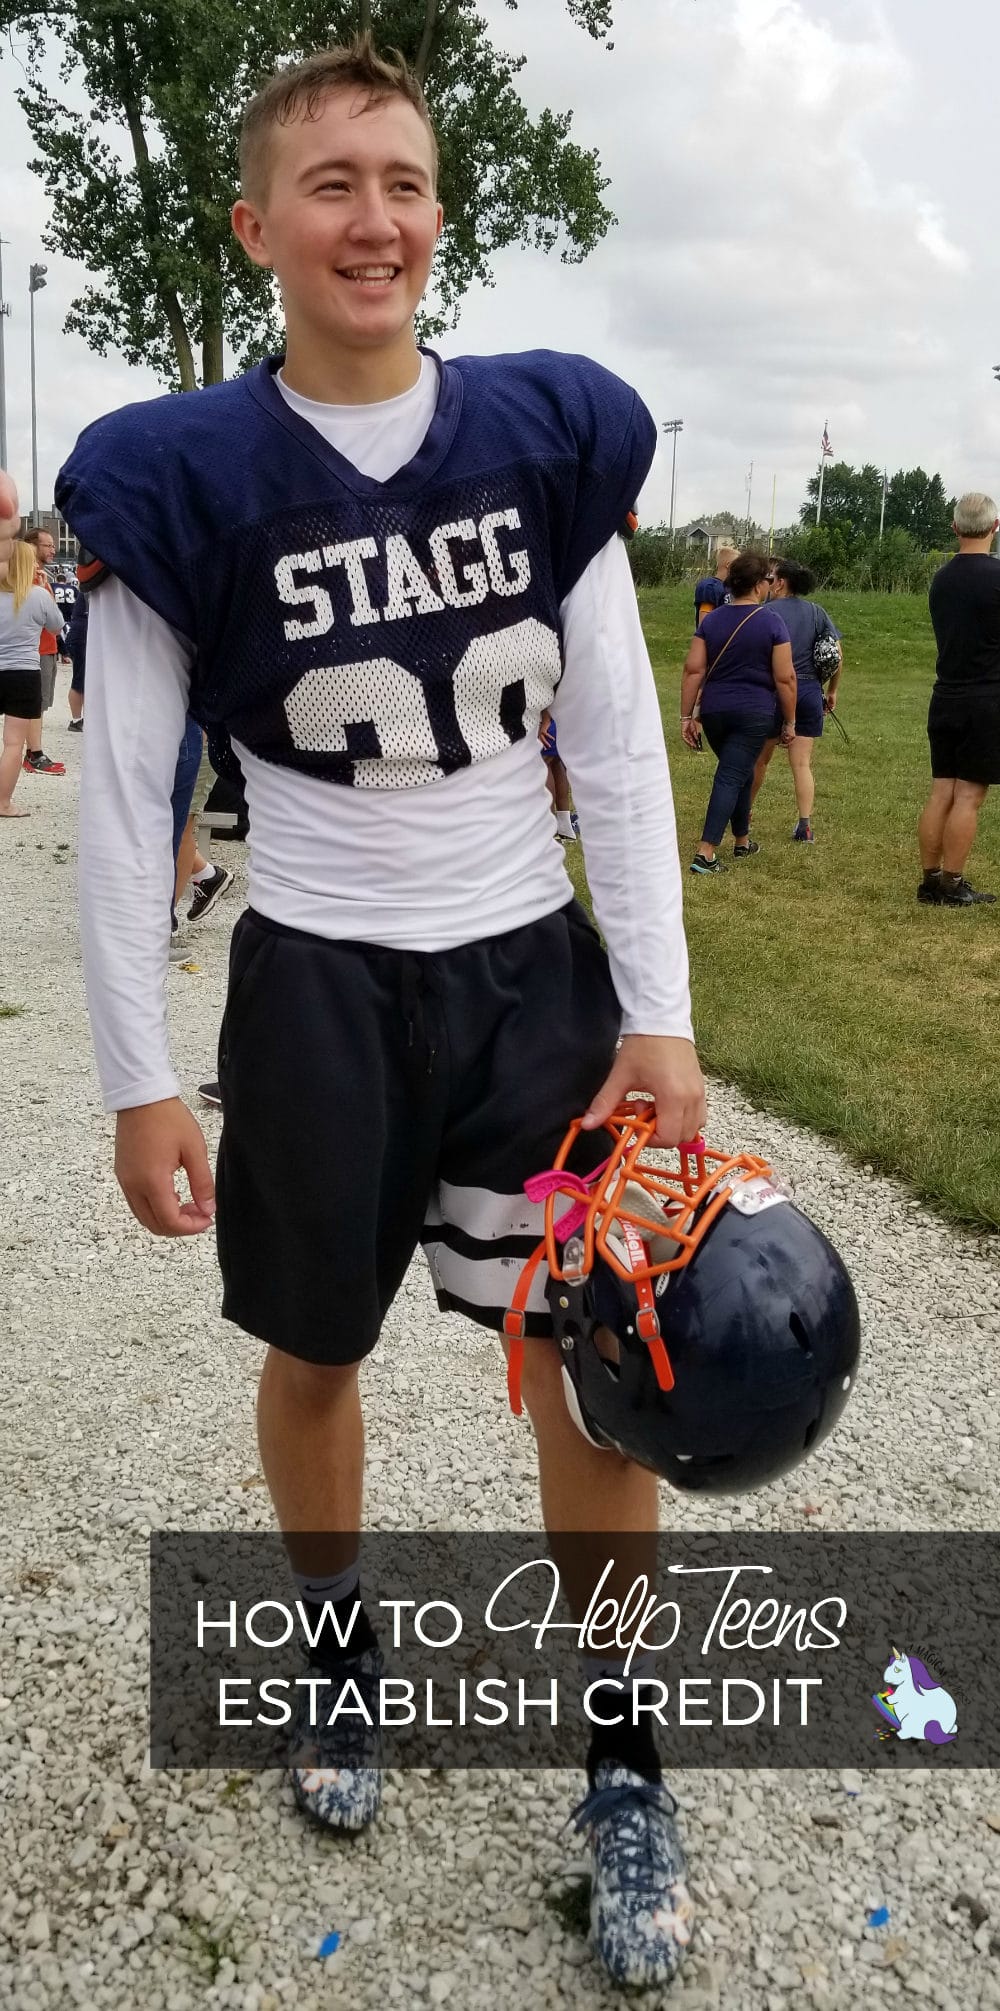 Adam smiling in his Stagg football jersey. 